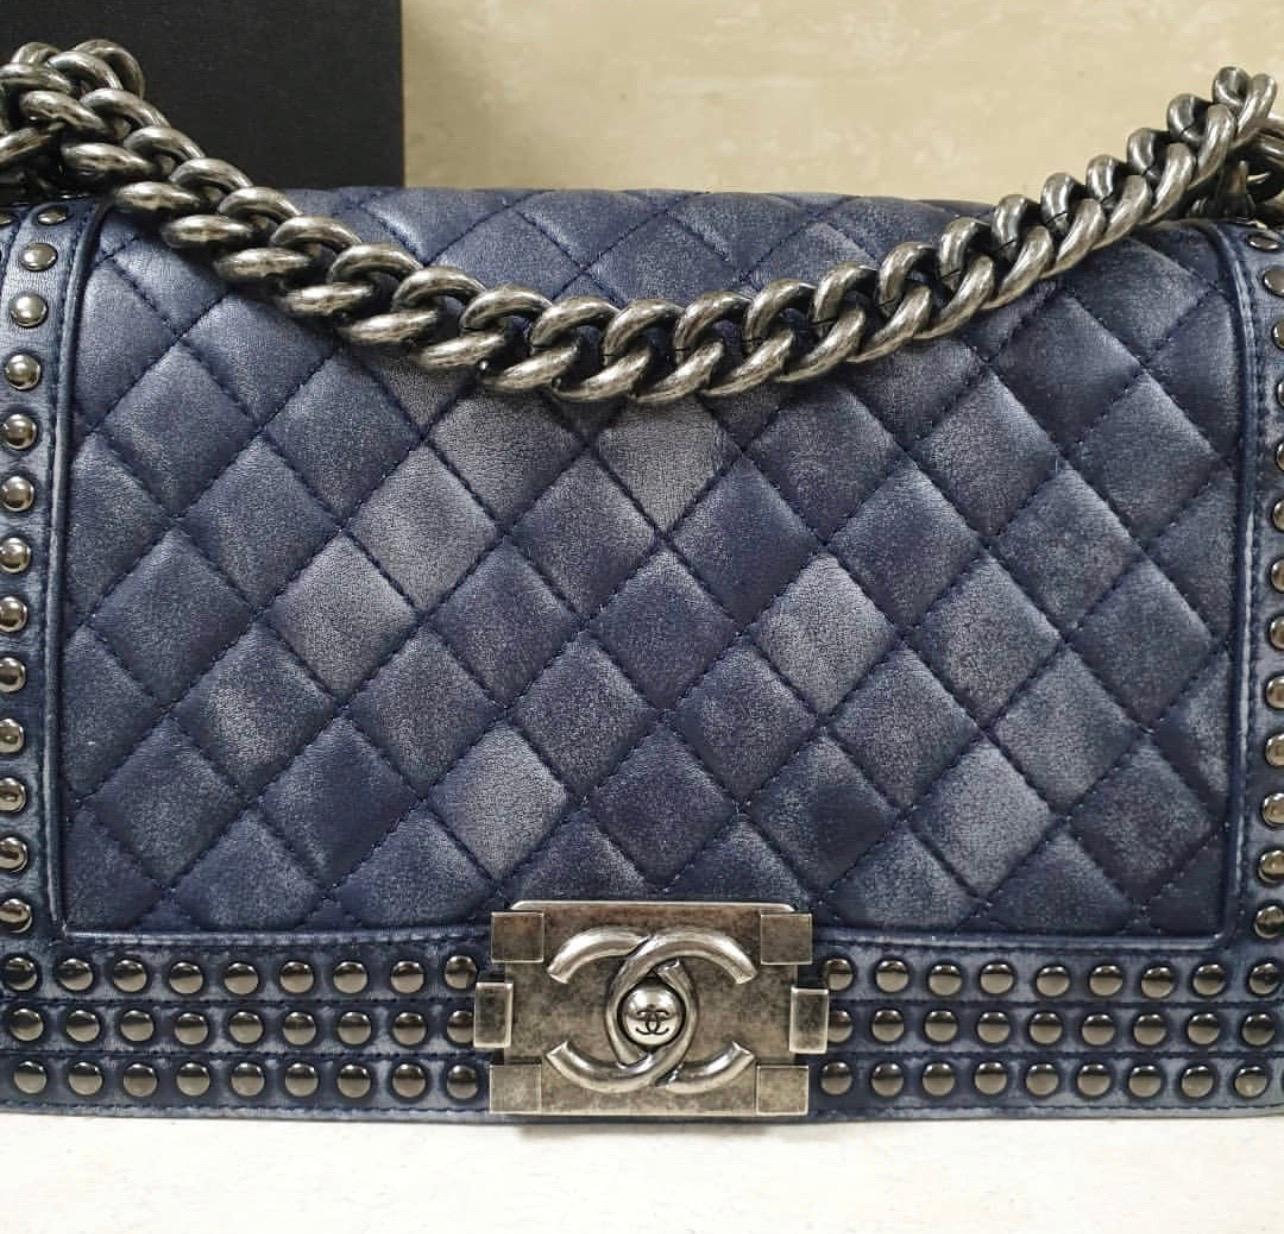 Chanel Medium Boy Faded Leather Studded Flap Bag from Chanel Paris-Dallas 2014 collection has been hand-finished by skilled artisans in the label's workshop.
Boasting soft faded blue quilted lambskin-leather exterior and studded detail along the